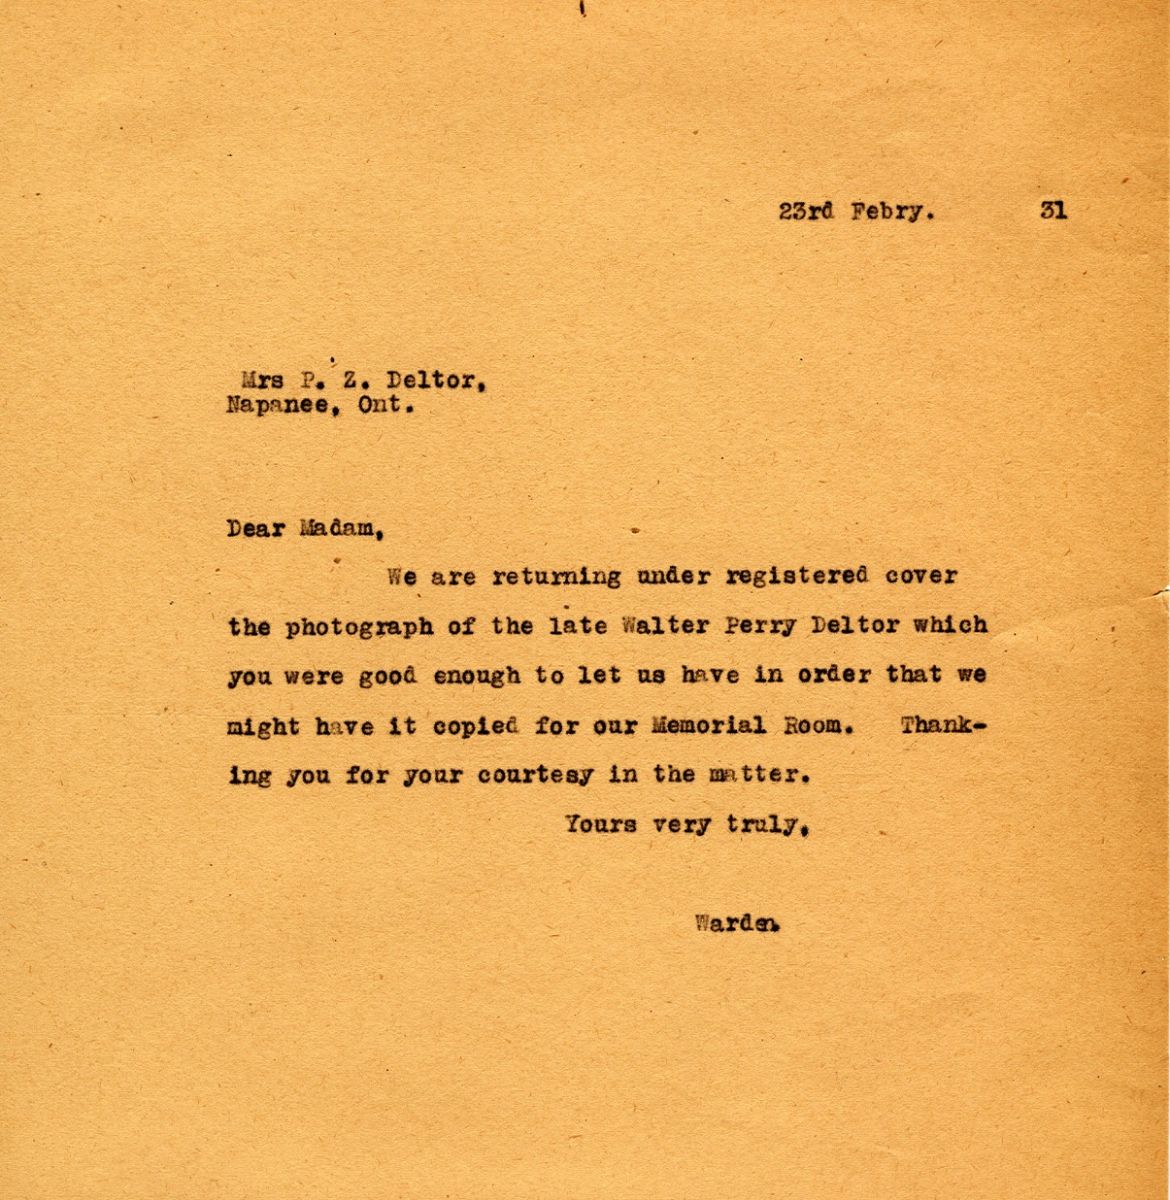 Letter from the Warden to Mrs. P.E. Detlor, 23rd February 1931